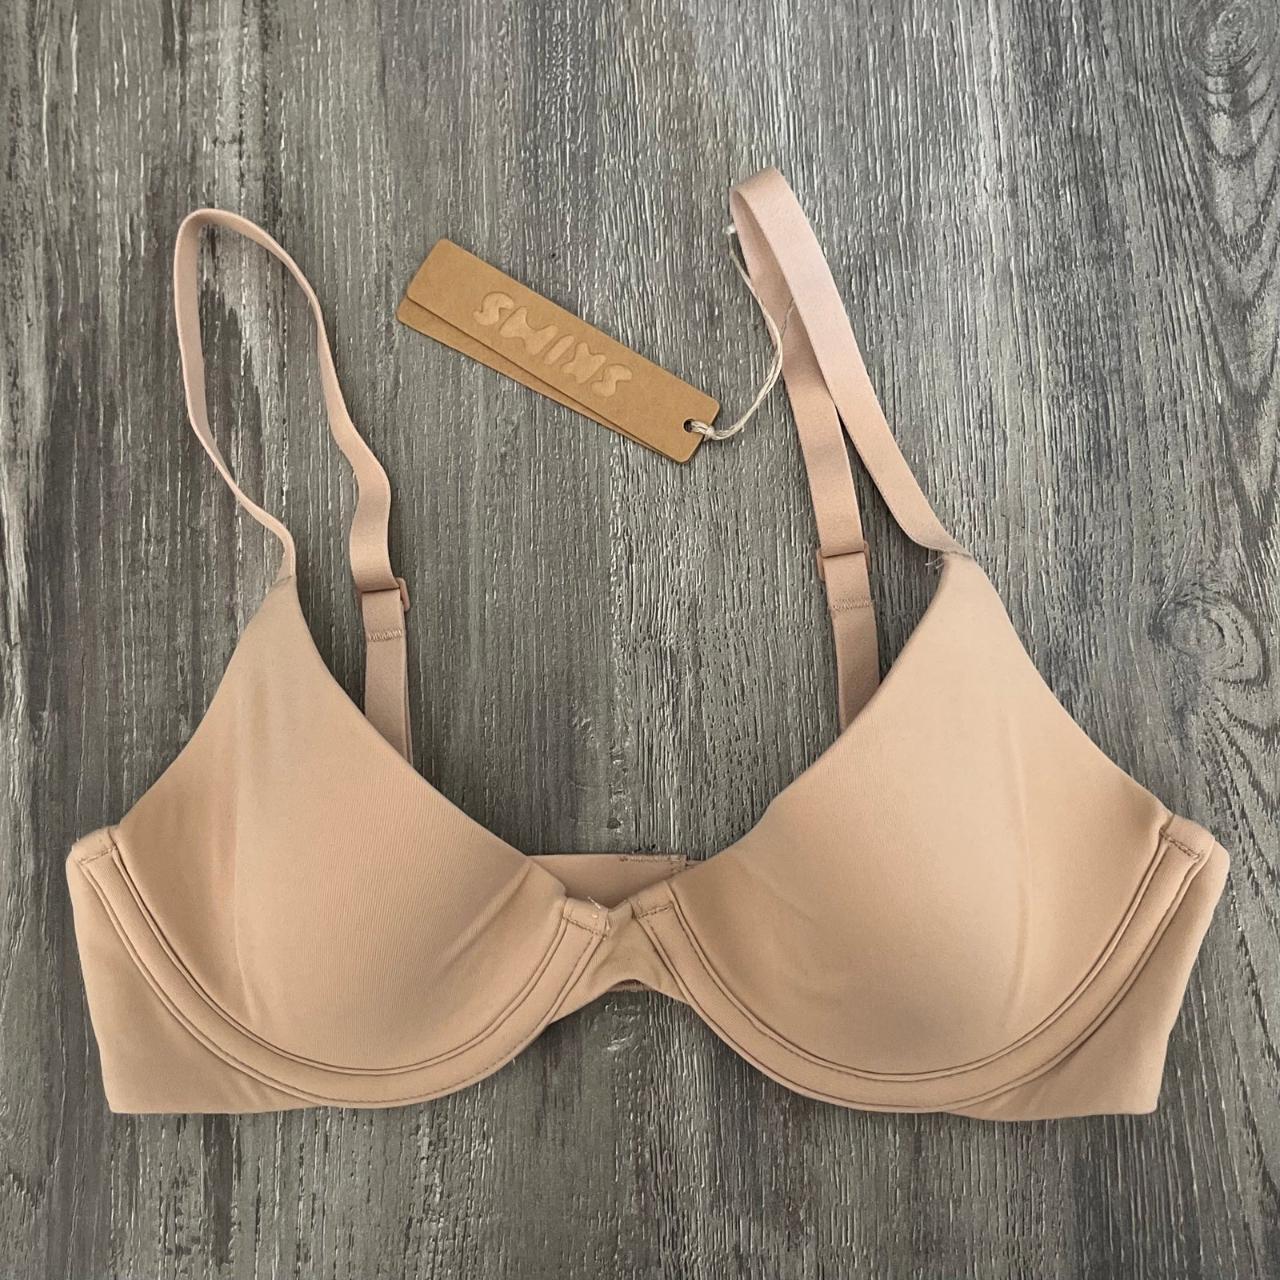 SKIMS on X: Tatiana wears the Sculpting Bra ($32) in XXS/XS in Clay. Shop  the Sculpting Bra in CLAY, SIENNA, UMBER, and ONYX colors OCTOBER 8 only at    / X